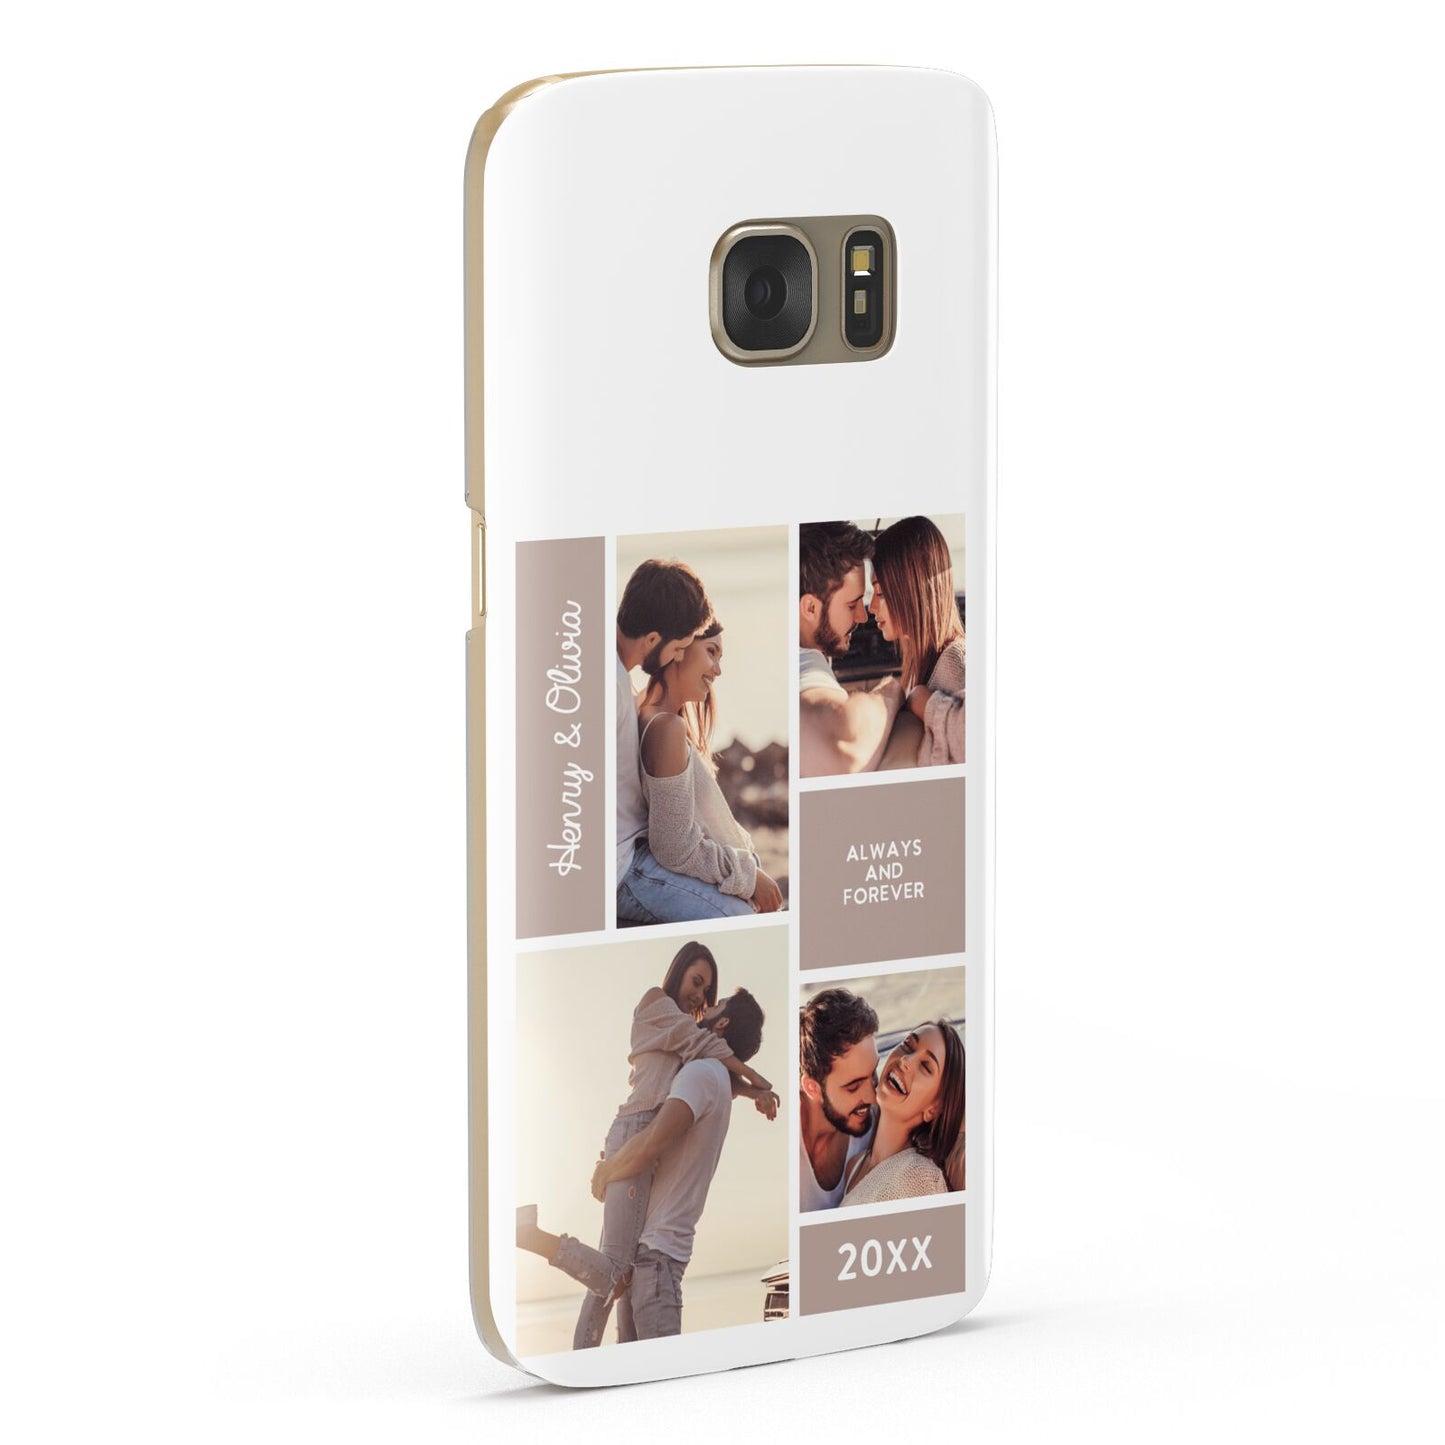 Couples Valentine Photo Collage Personalised Samsung Galaxy Case Fourty Five Degrees